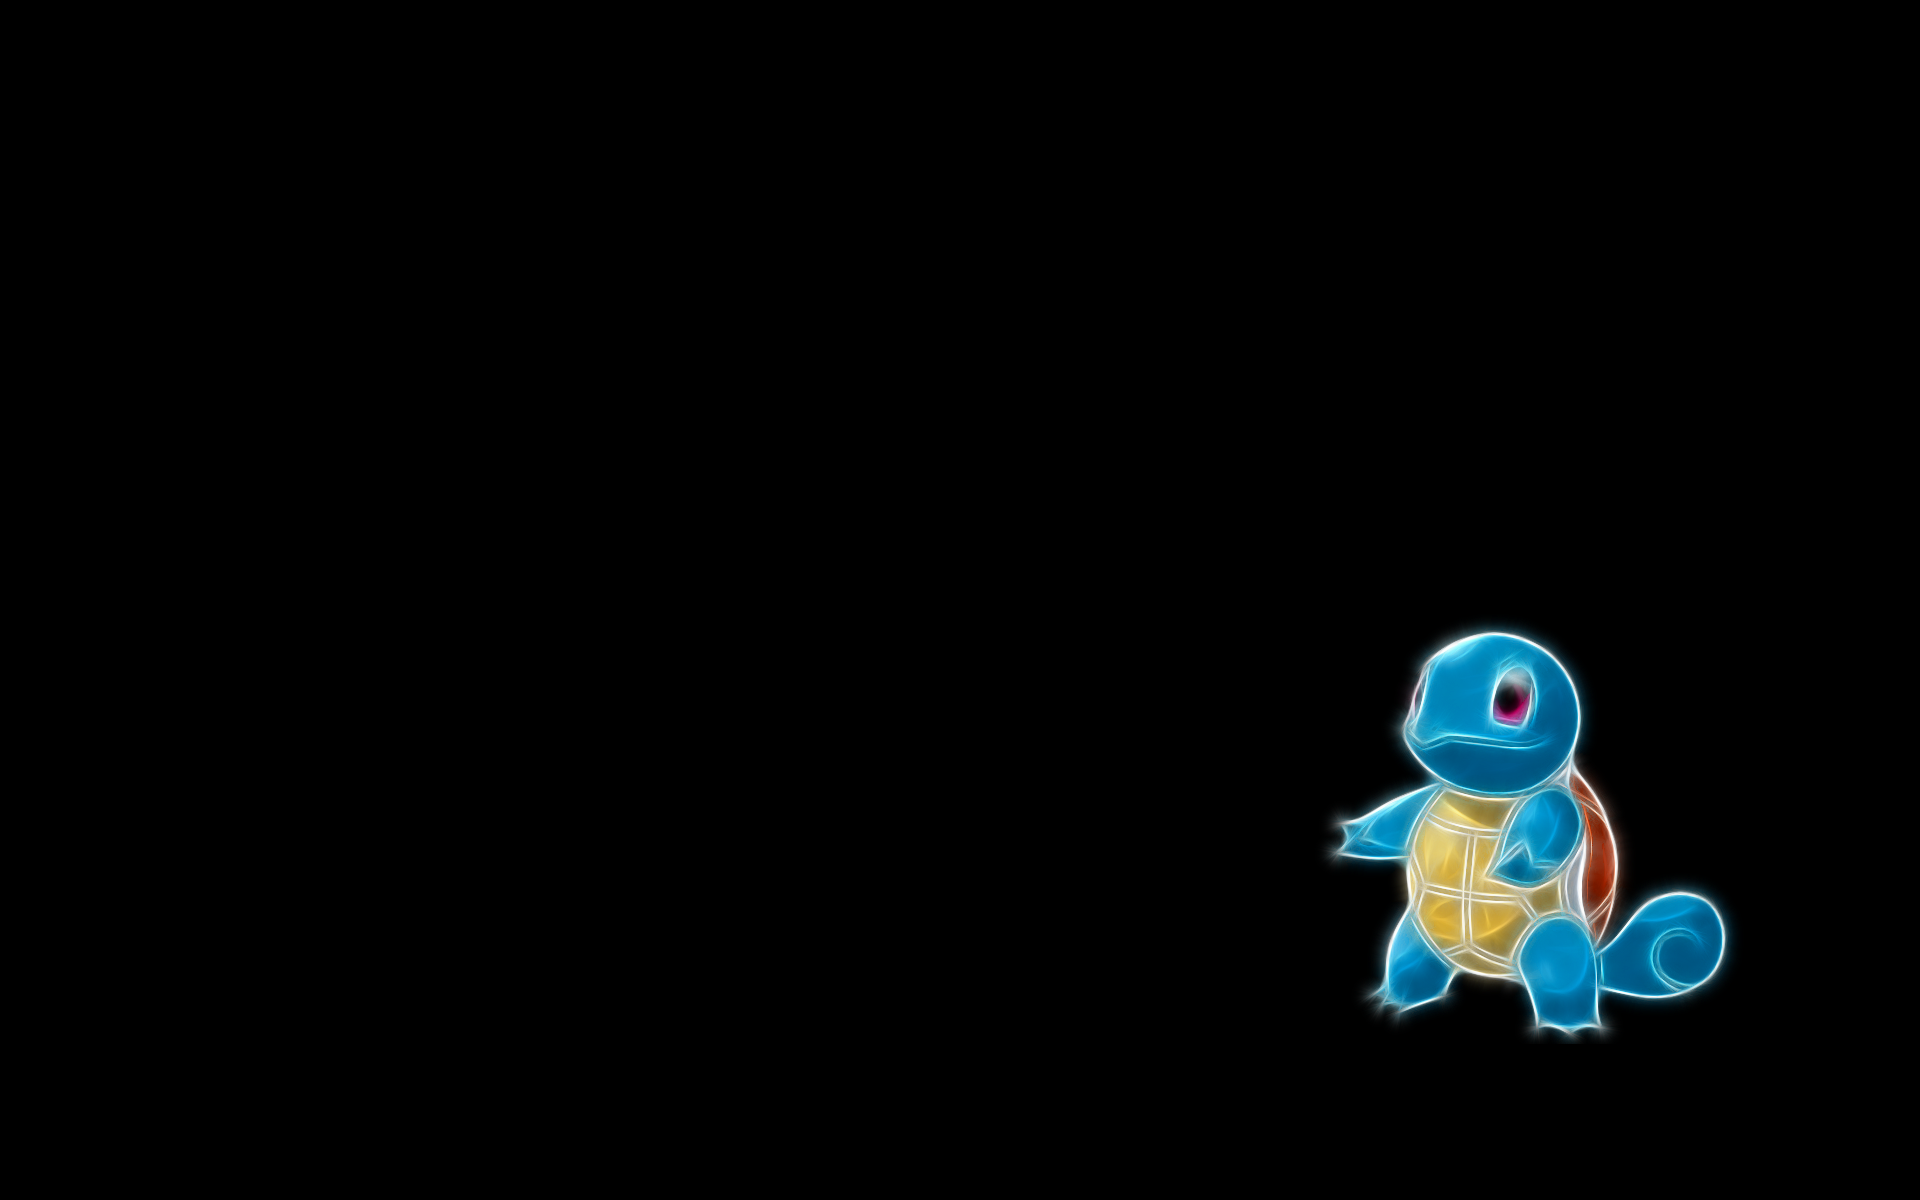 General 1920x1200 Pokémon Squirtle Fractalius minimalism video games simple background black background video game characters